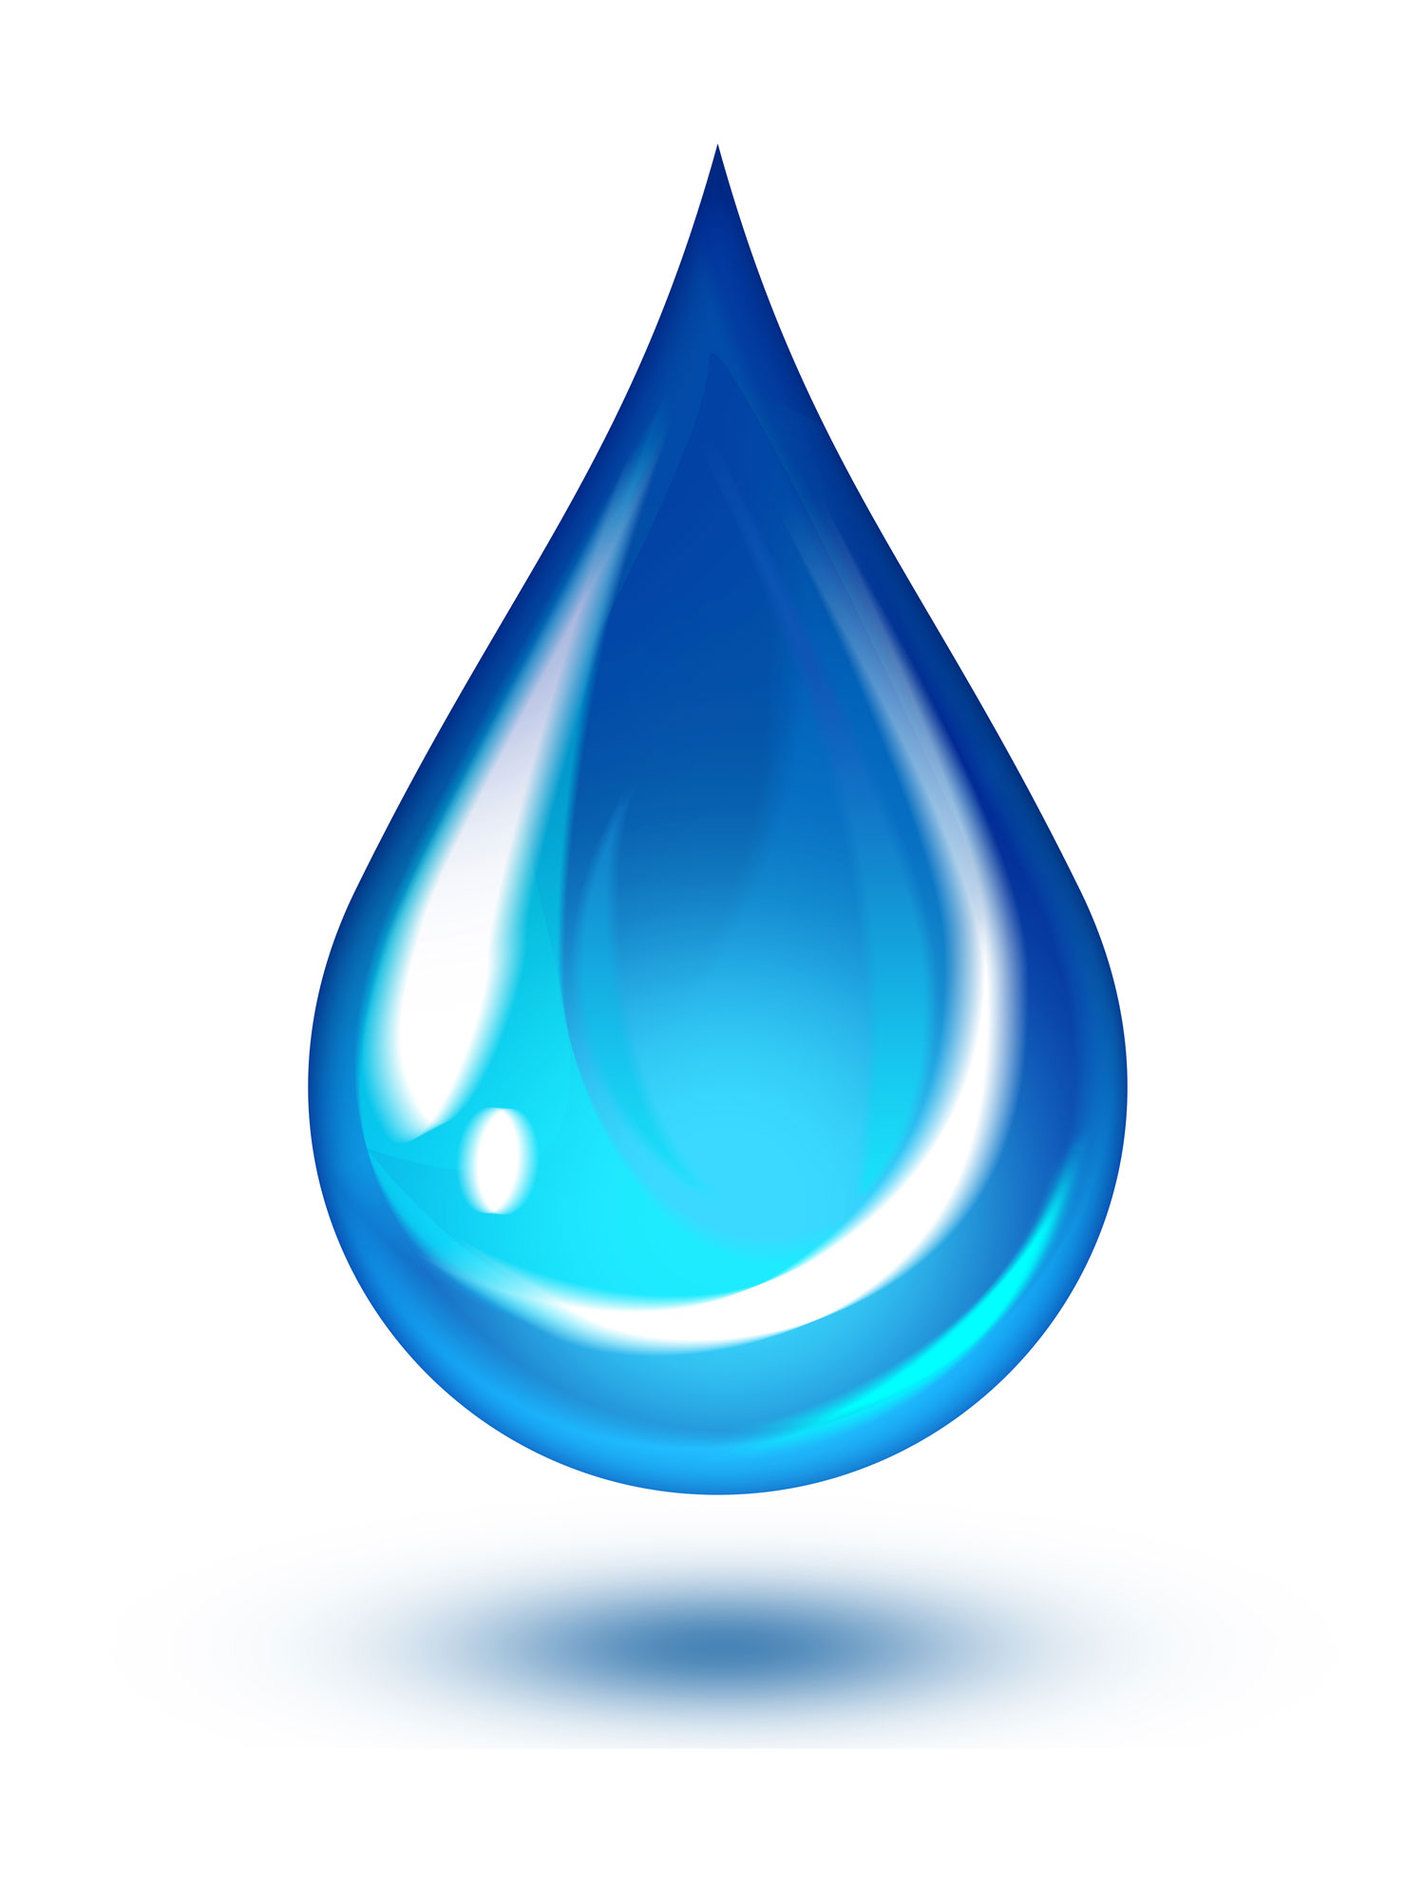 Water drop symbol clipart free to use clip art resource.